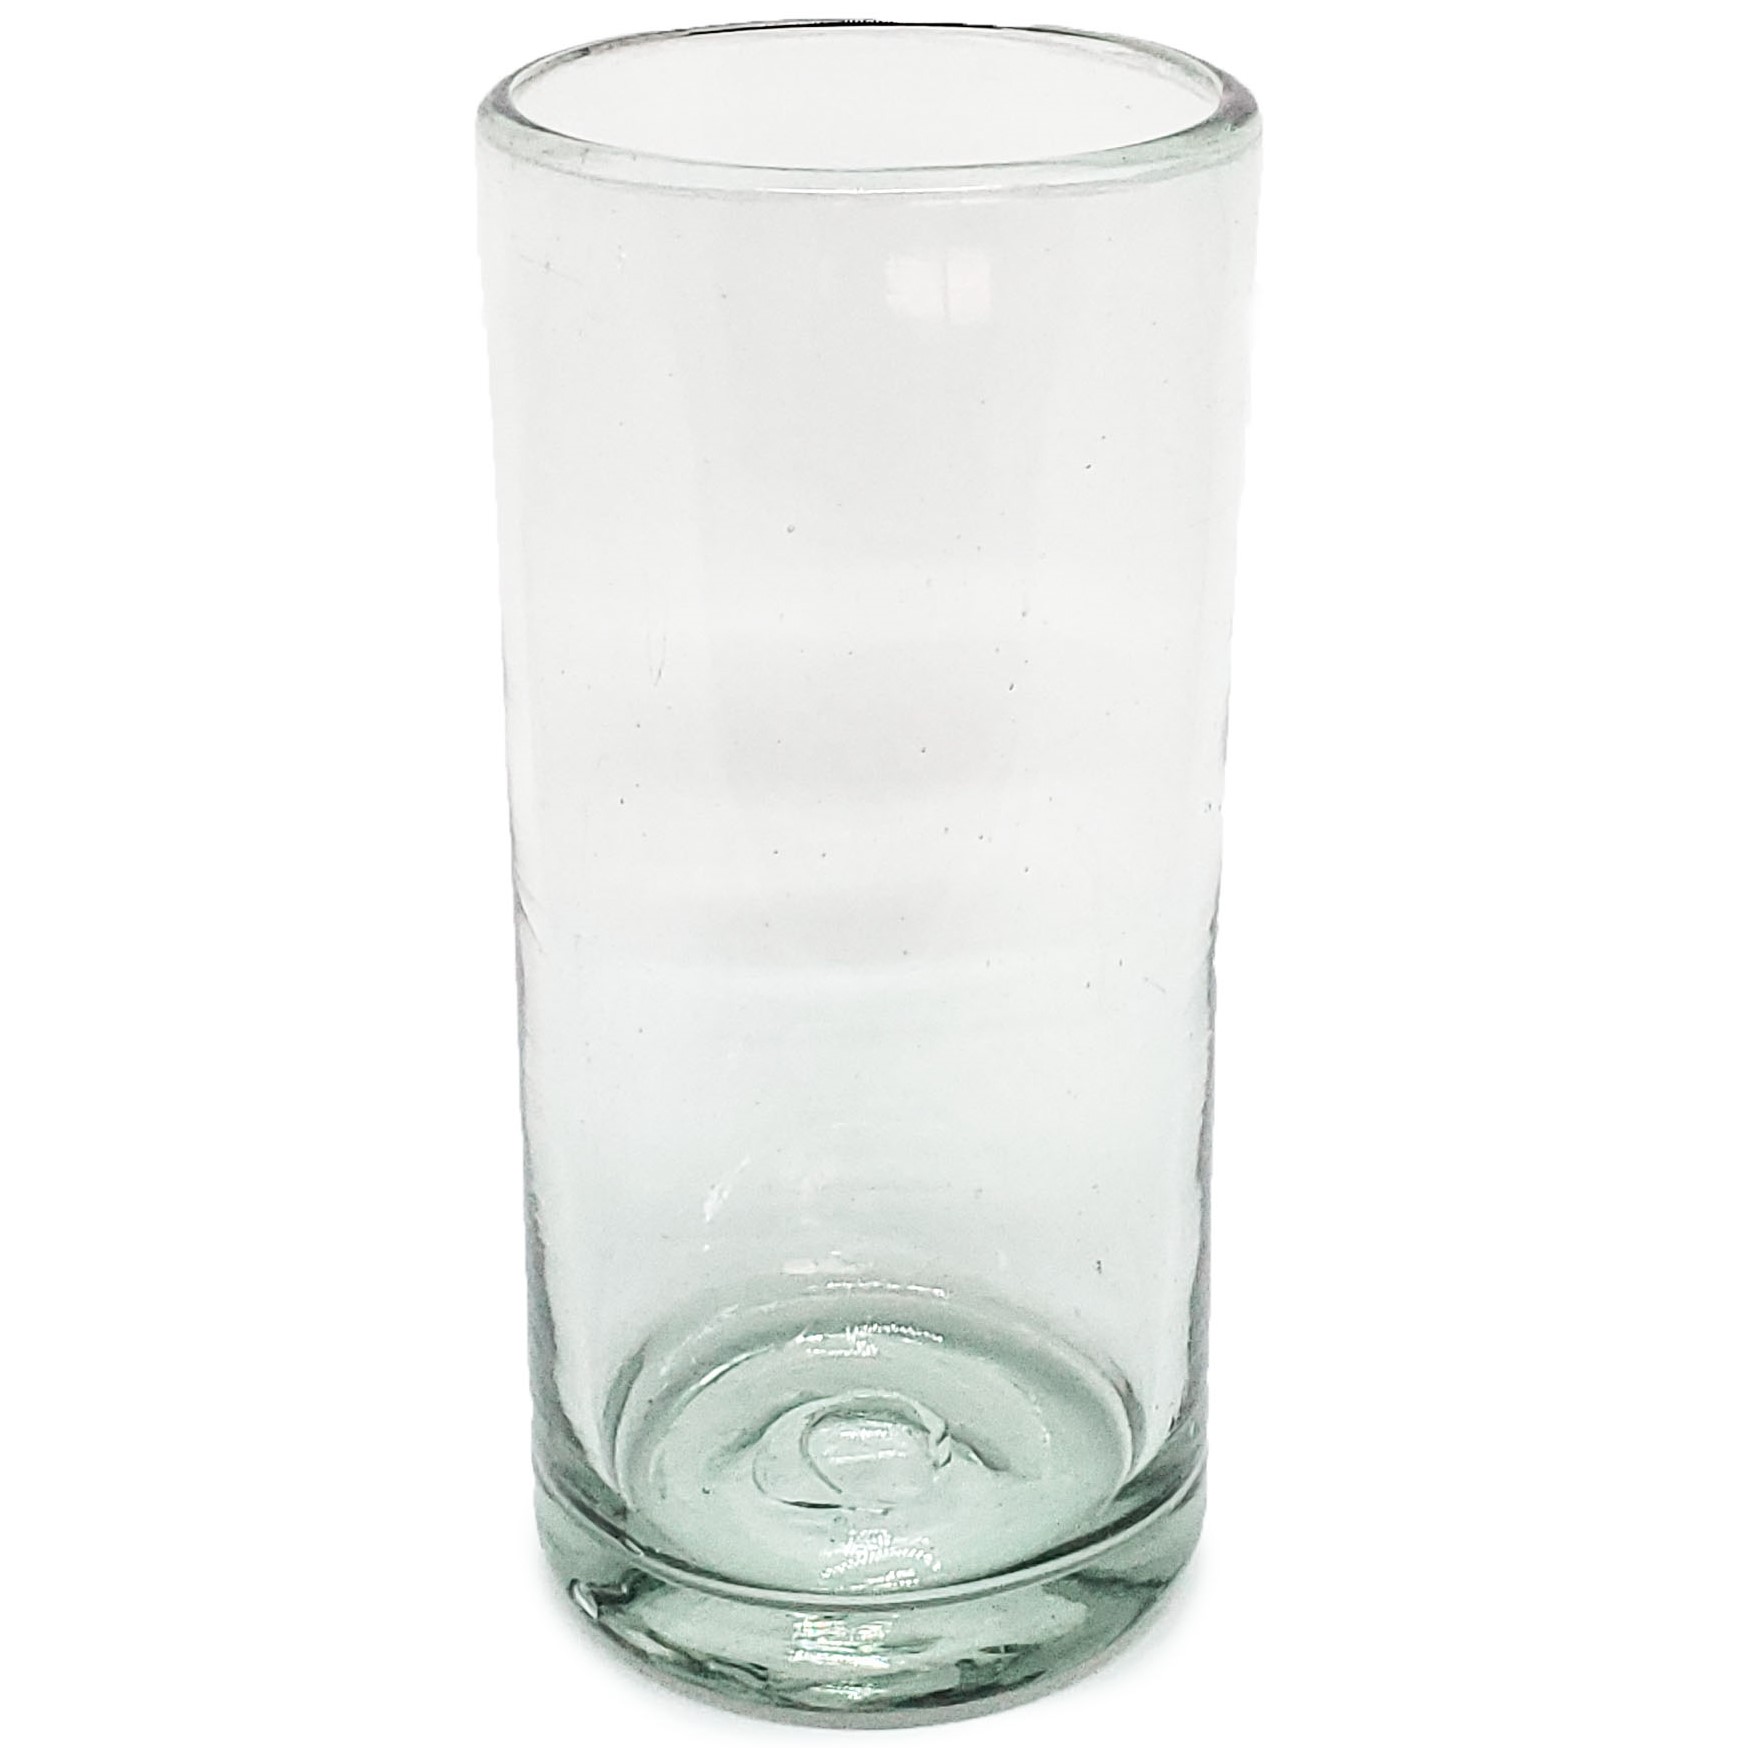 Wholesale Mexican Glasses / Clear 20 oz Tall Iced Tea Glasses  / This classic set of iced tea glasses is made of recycled glass. Tiny bubbles are trapped within the glass.